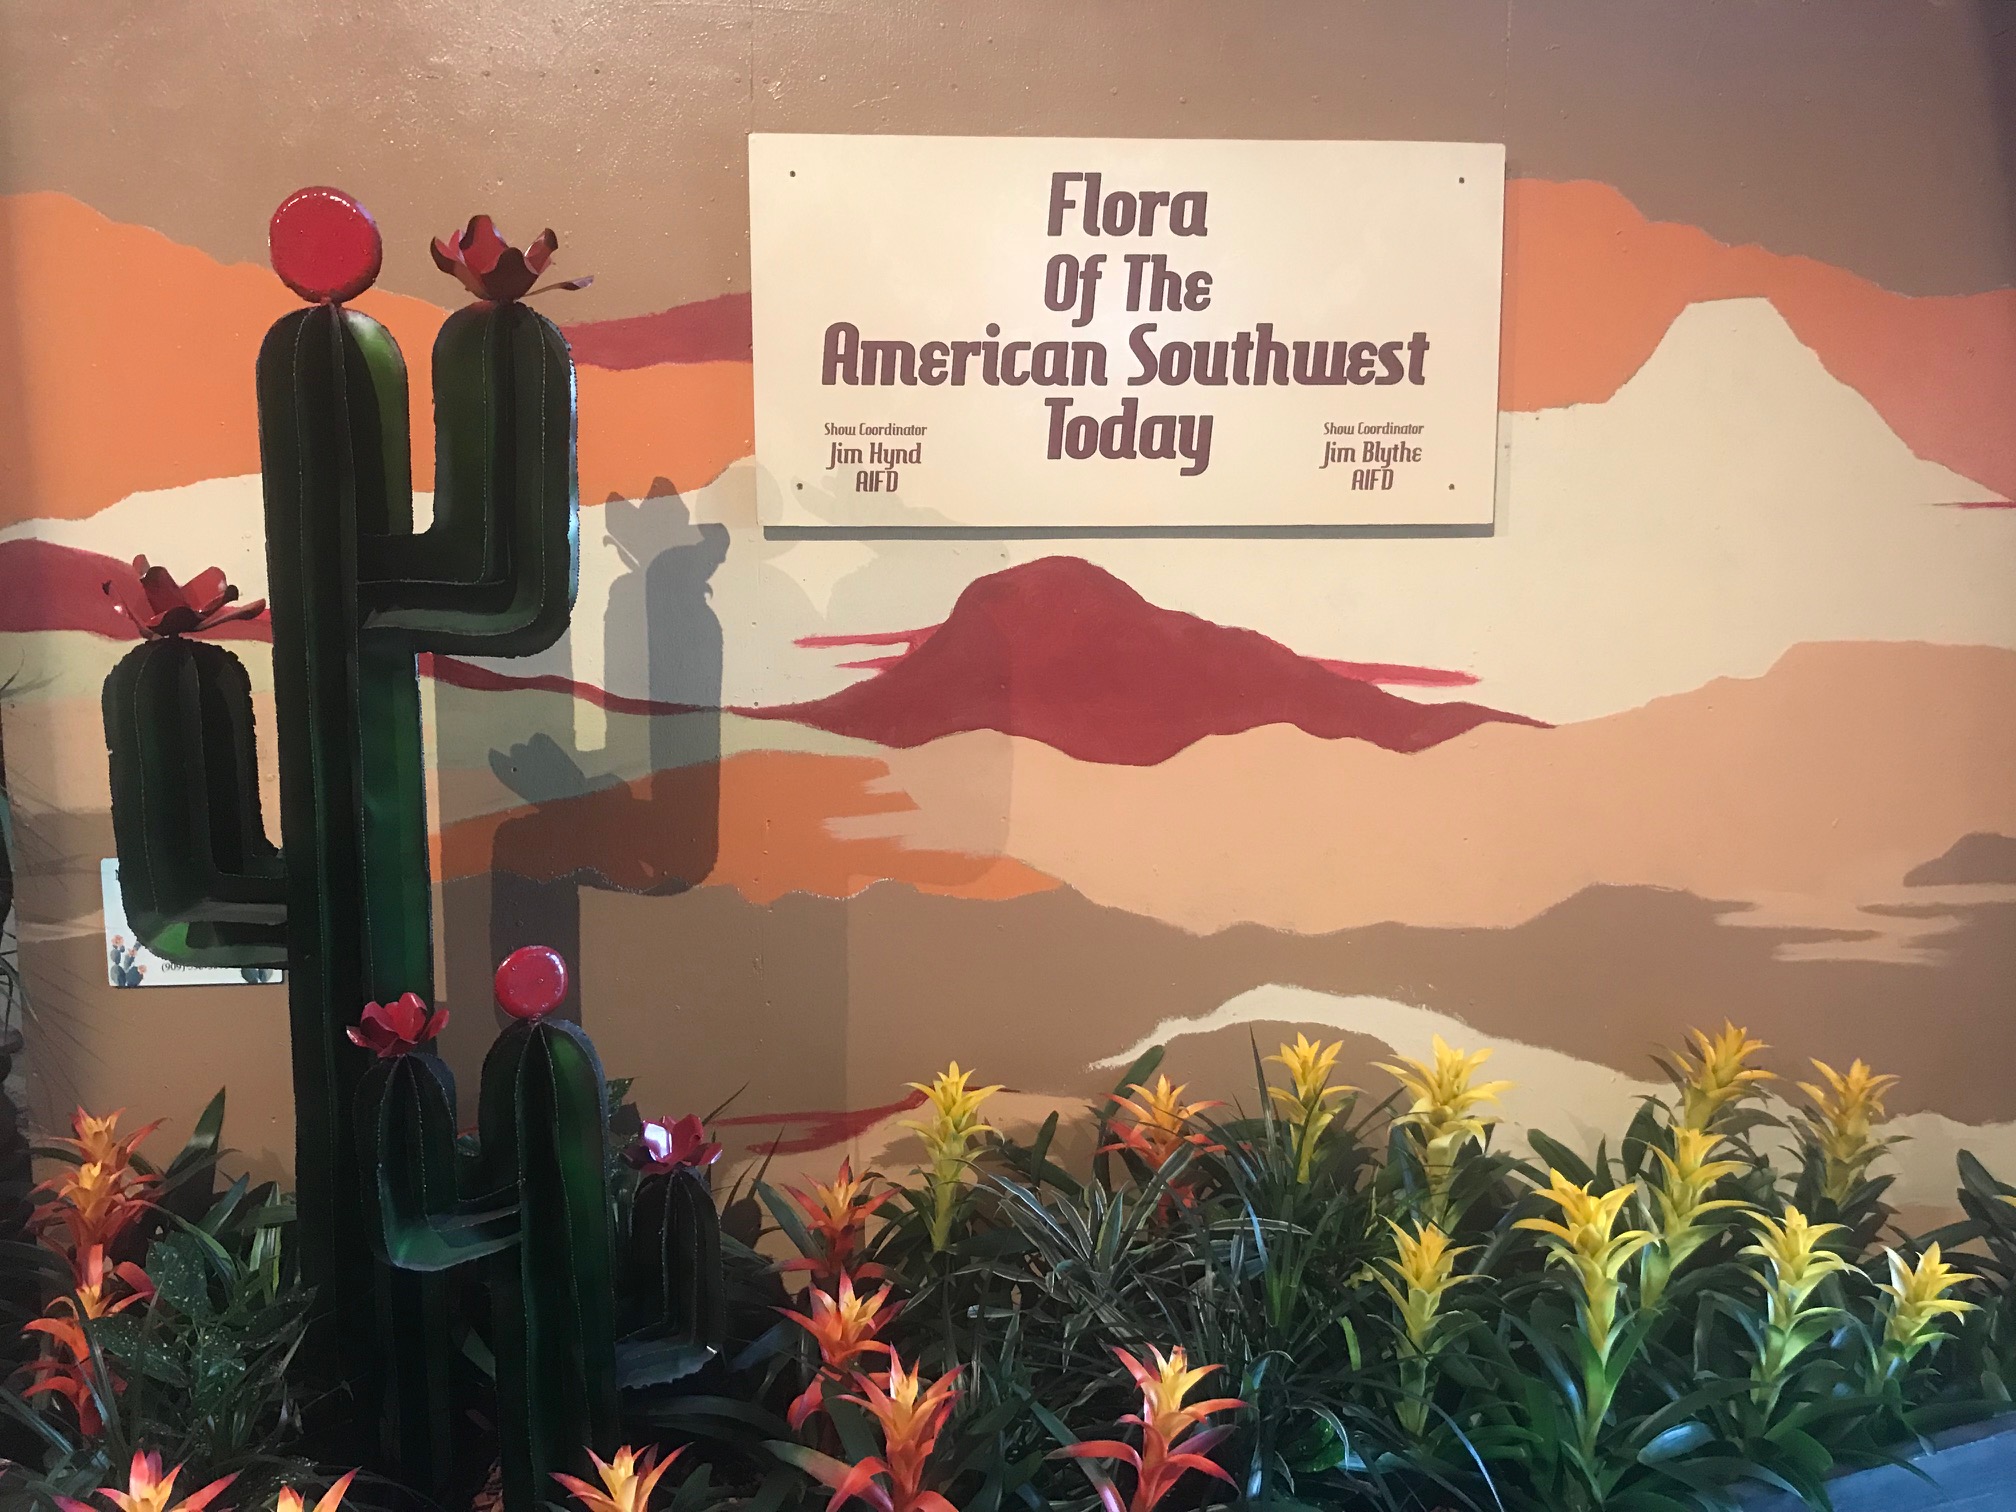 Flora & Fauna of the American Southwest